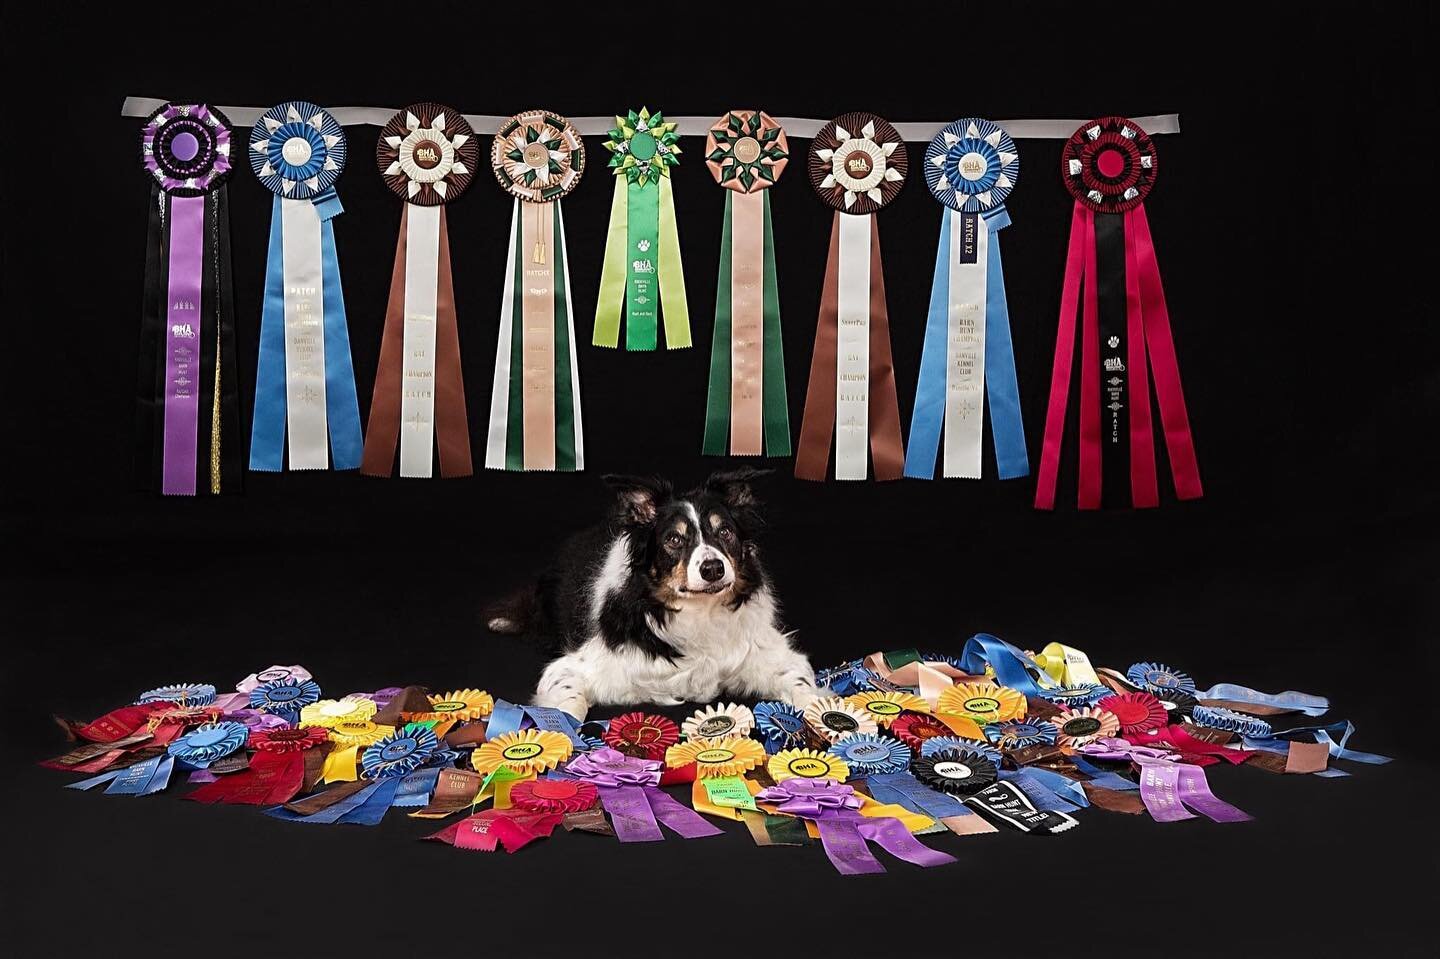 This beautiful pup has been busy!! So many awards 😍 #puppy #dogs #dogmom